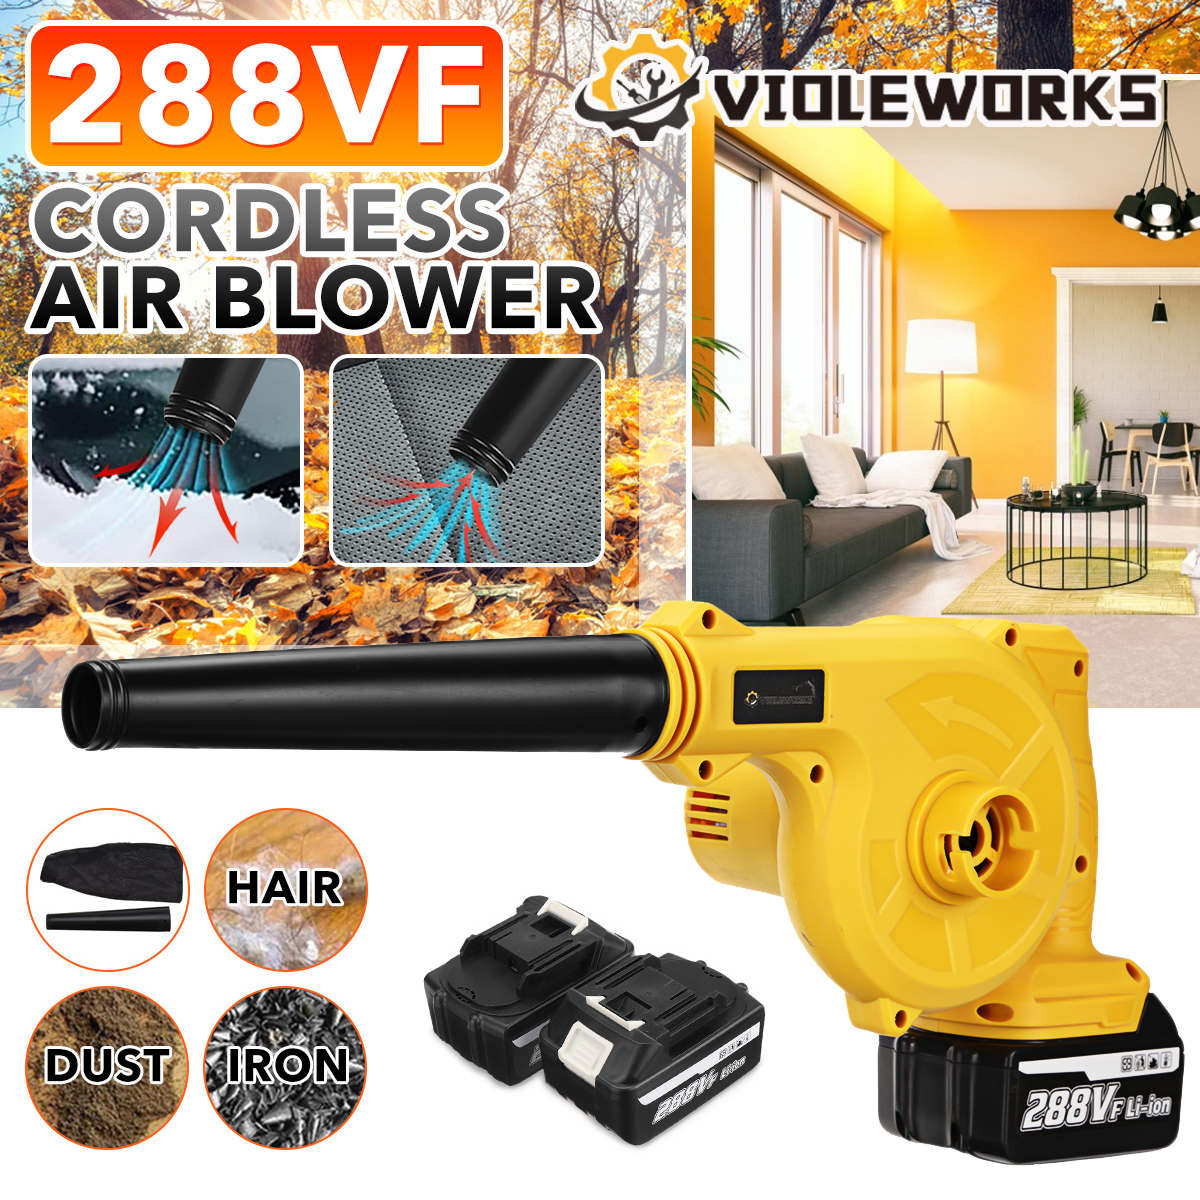 VIOLEWORKS-1500W-288VF-Cordless-Air-Blower-Rechargable-Air-Blowing-Suction-Dust-Collecting-Computer--1843546-1